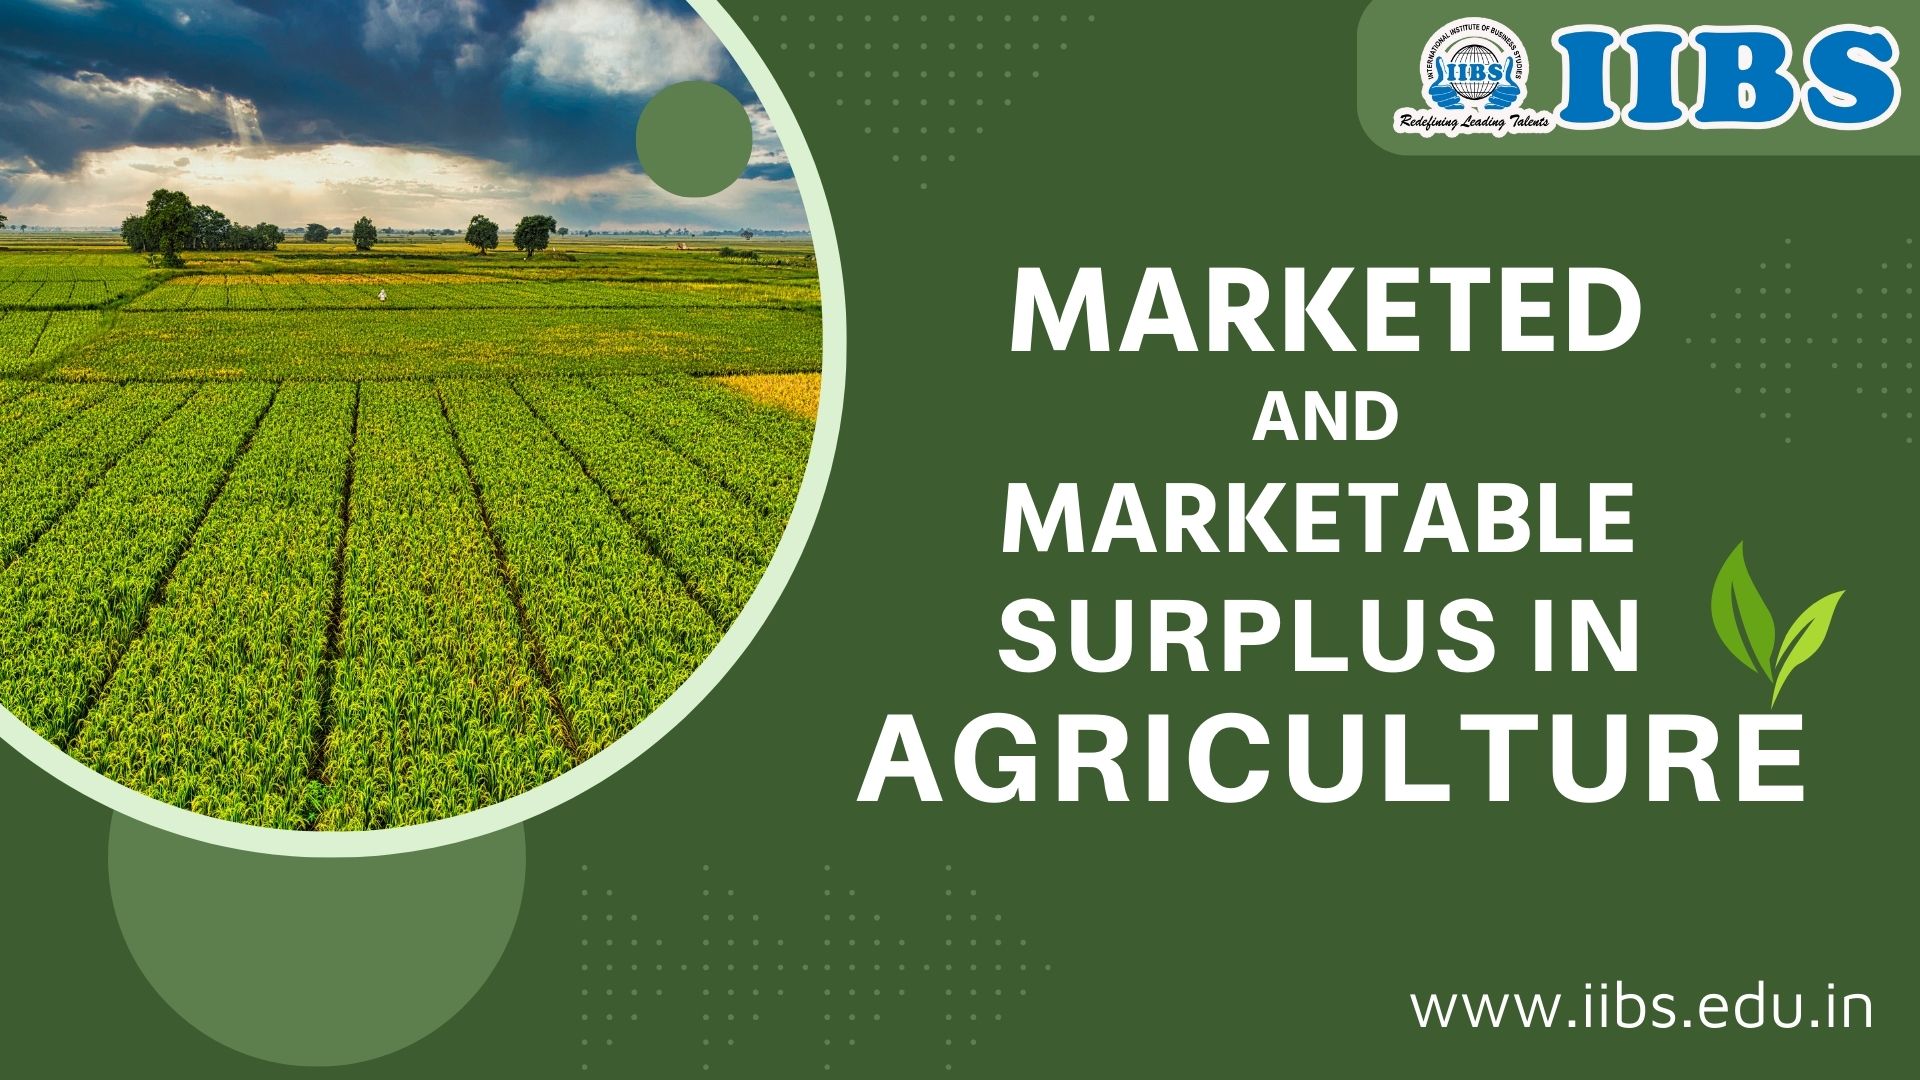 Marketed and Marketable Surplus in Agriculture